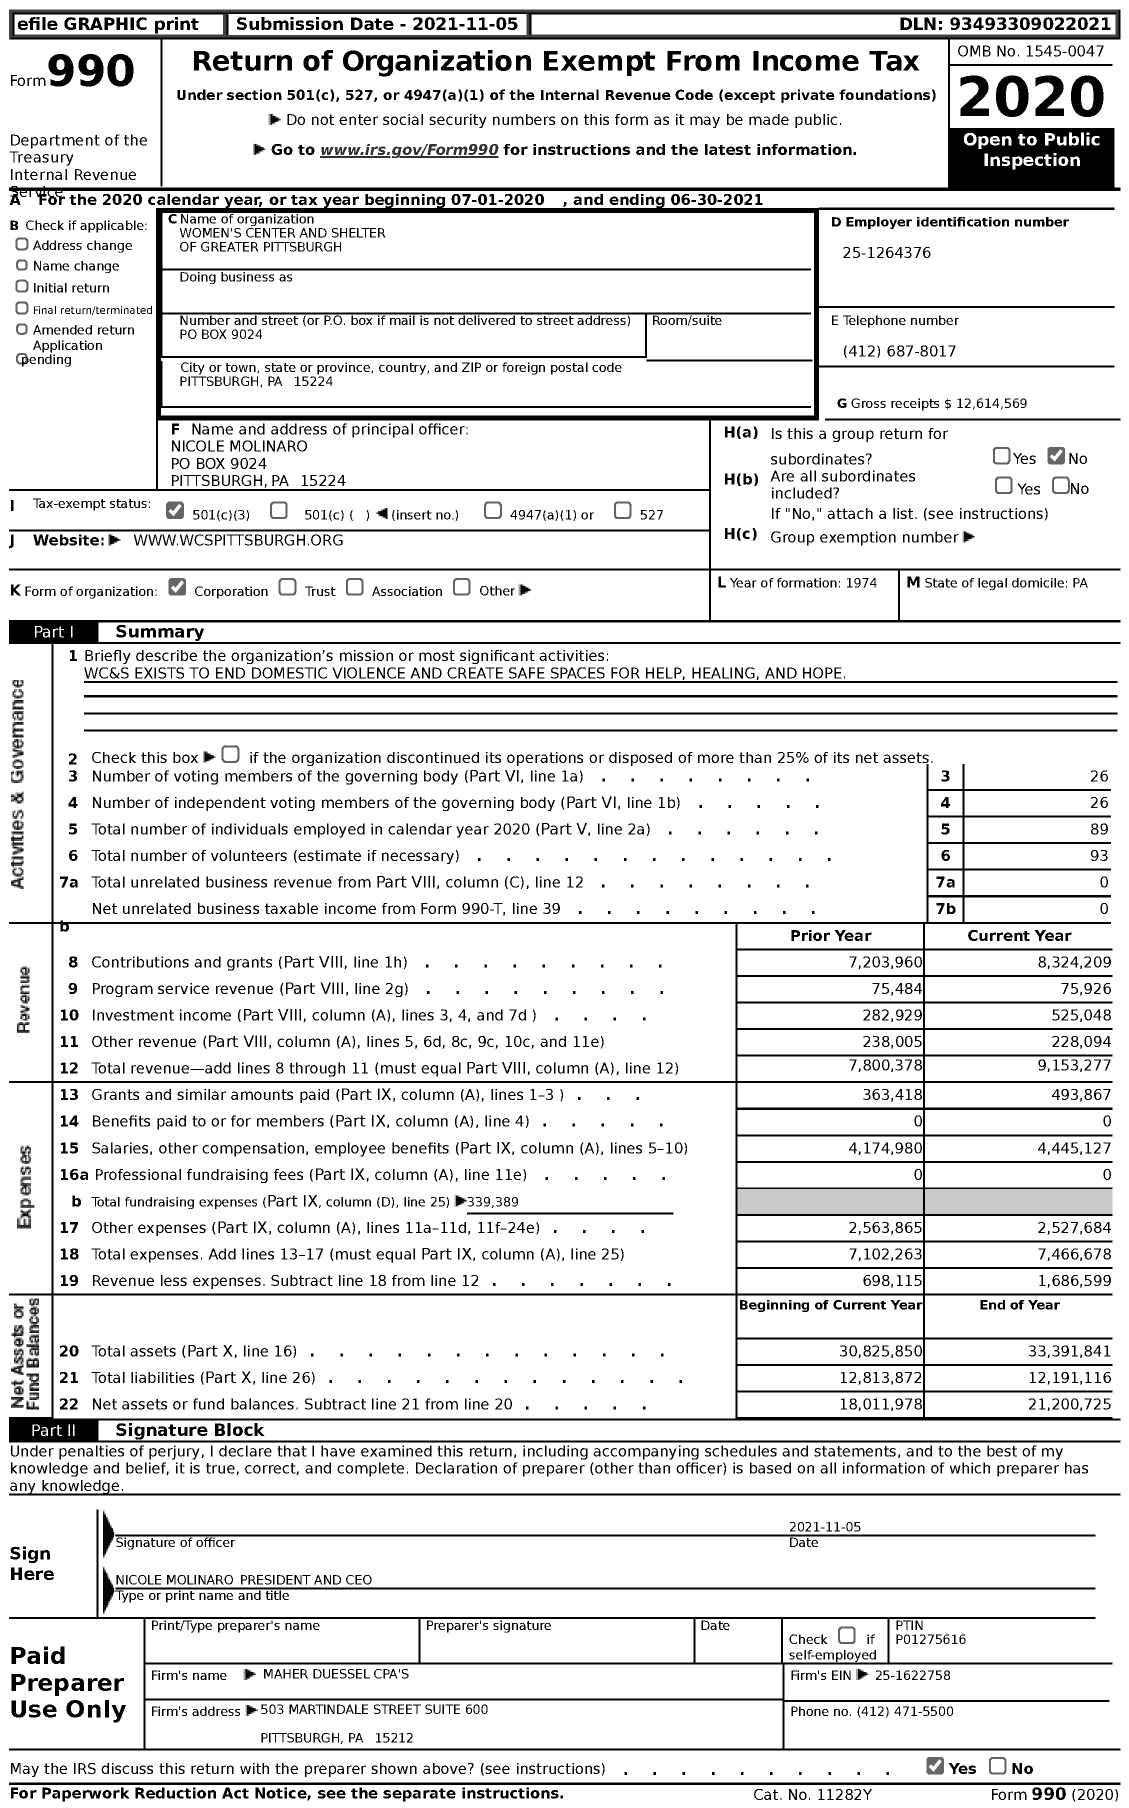 Image of first page of 2020 Form 990 for Women's Center and Shelter of Greater Pittsburgh